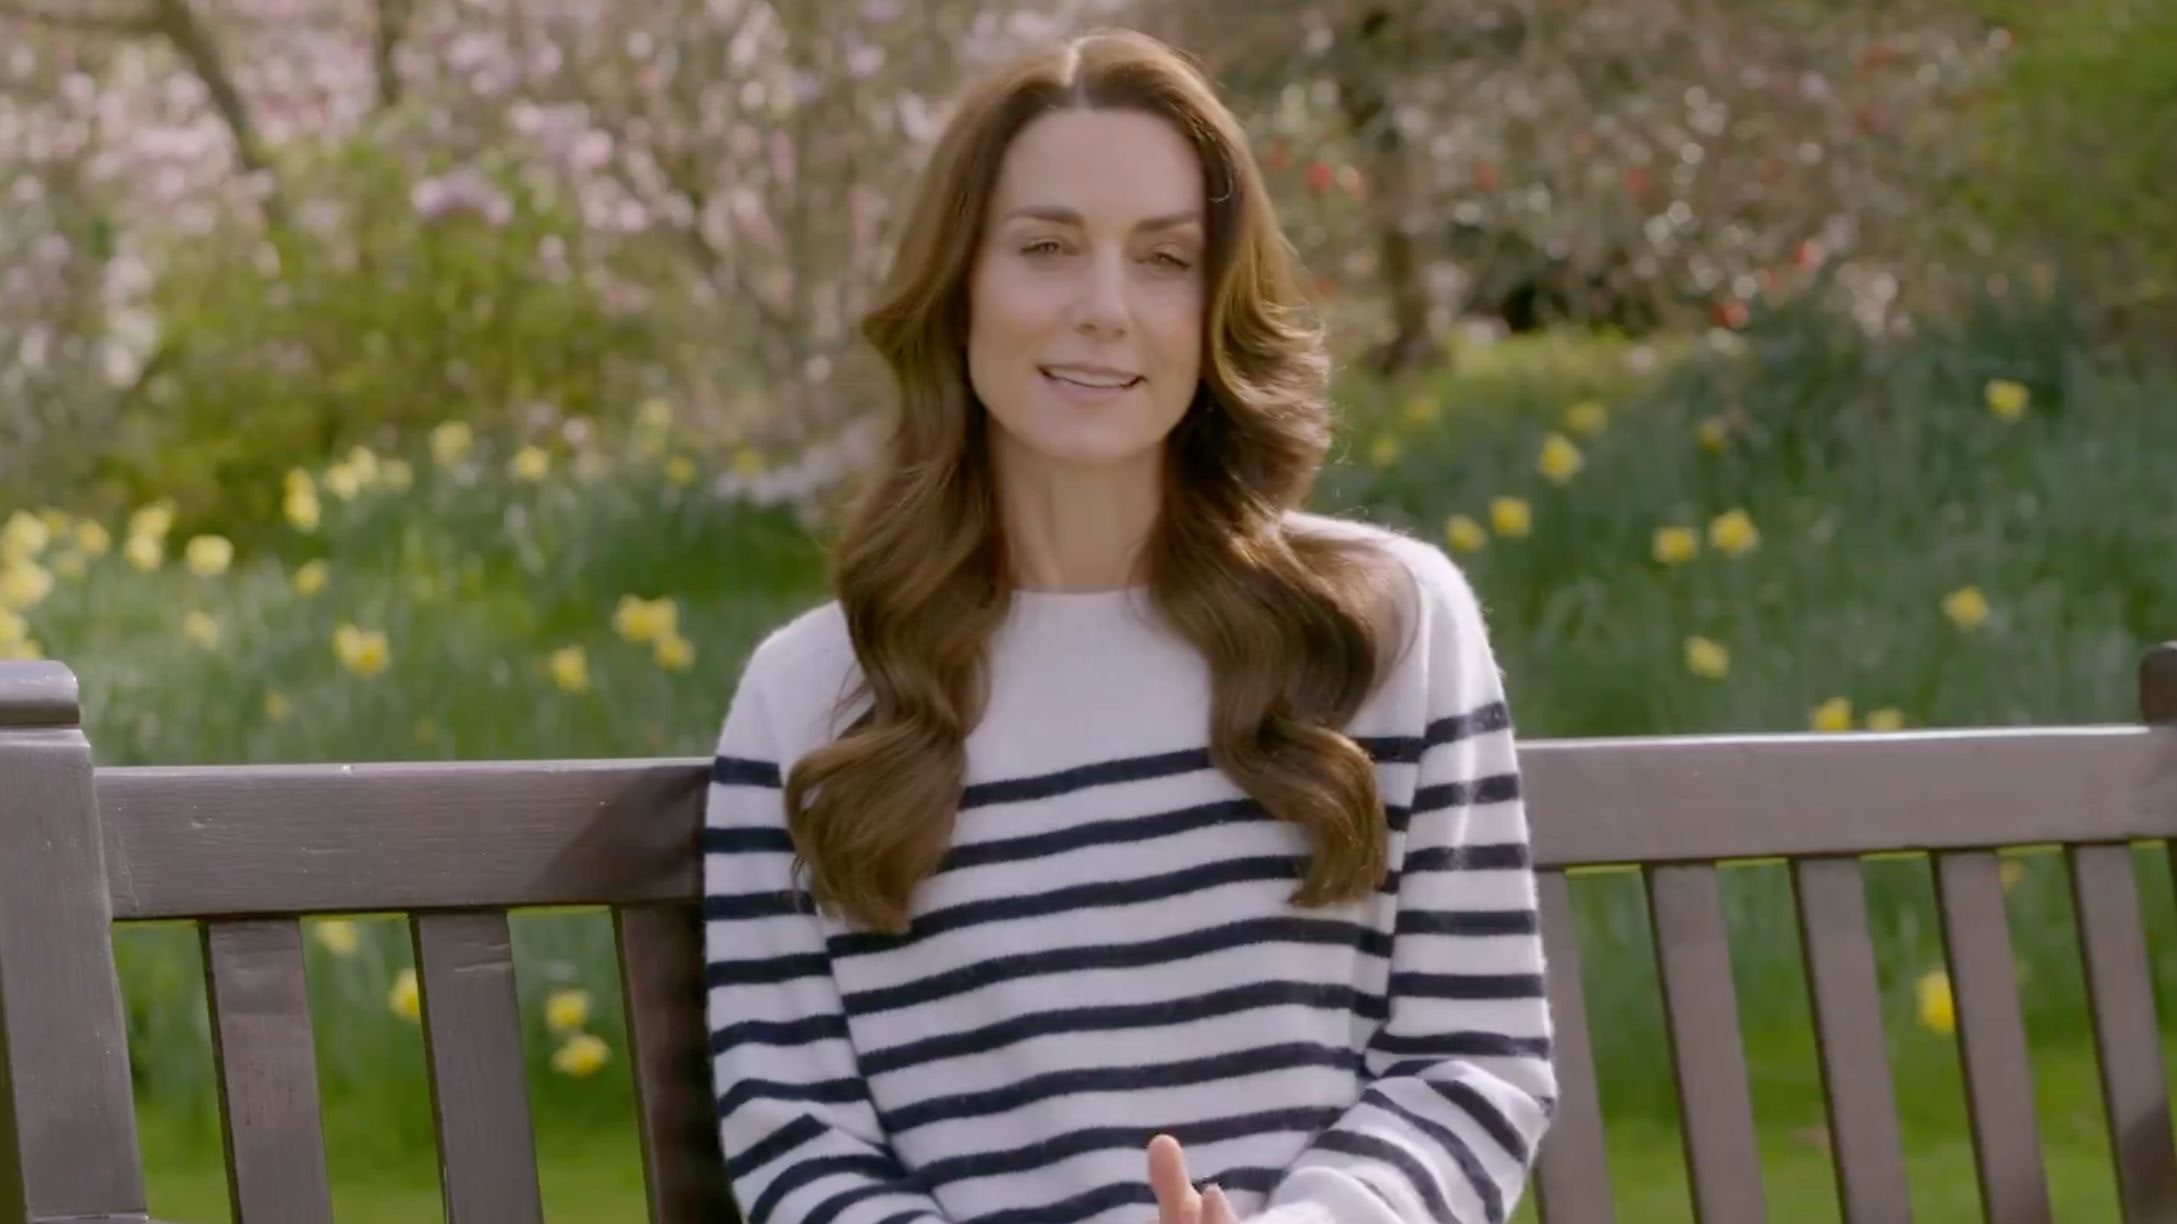 Kate Middleton’s Video Statement Appears to Include a Subtle Homage to Cancer Patients and Survivors